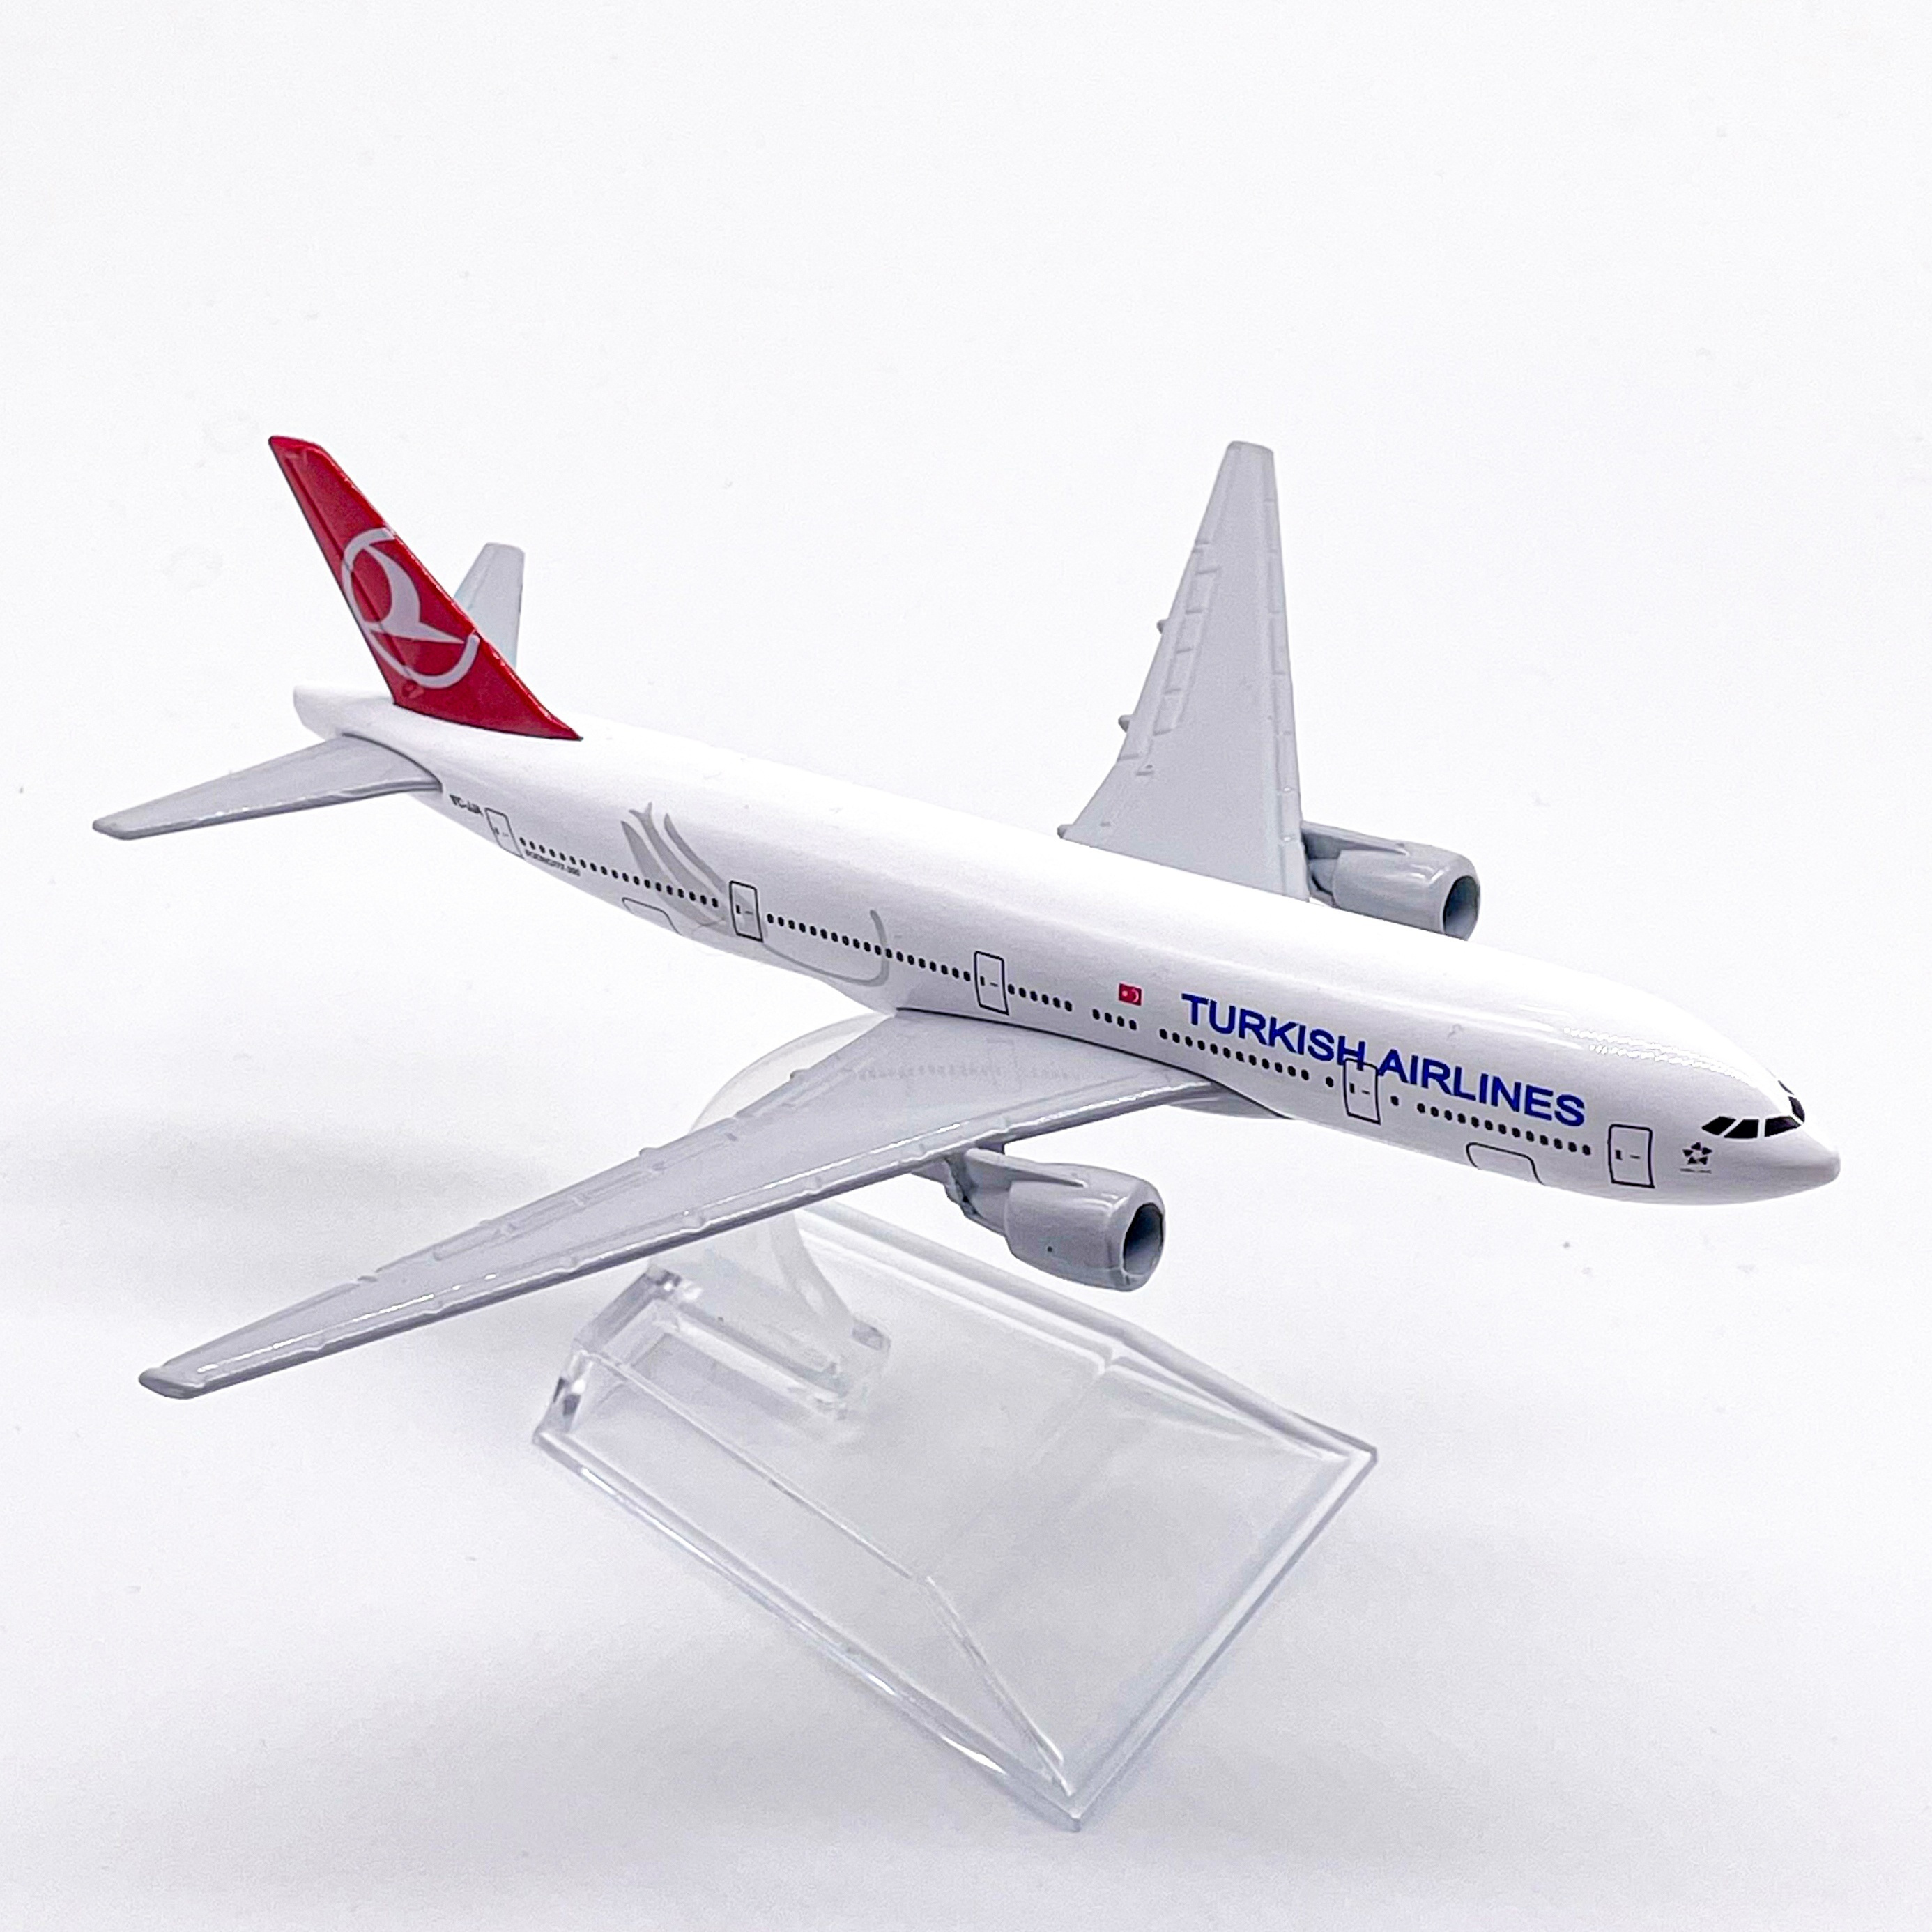 

Anatolian Airlines 1:400 Scale Die-cast Metal Model Airplane - 6.3" Collectible, Perfect For Gifts & Home Decor, Ideal For Ages 14+